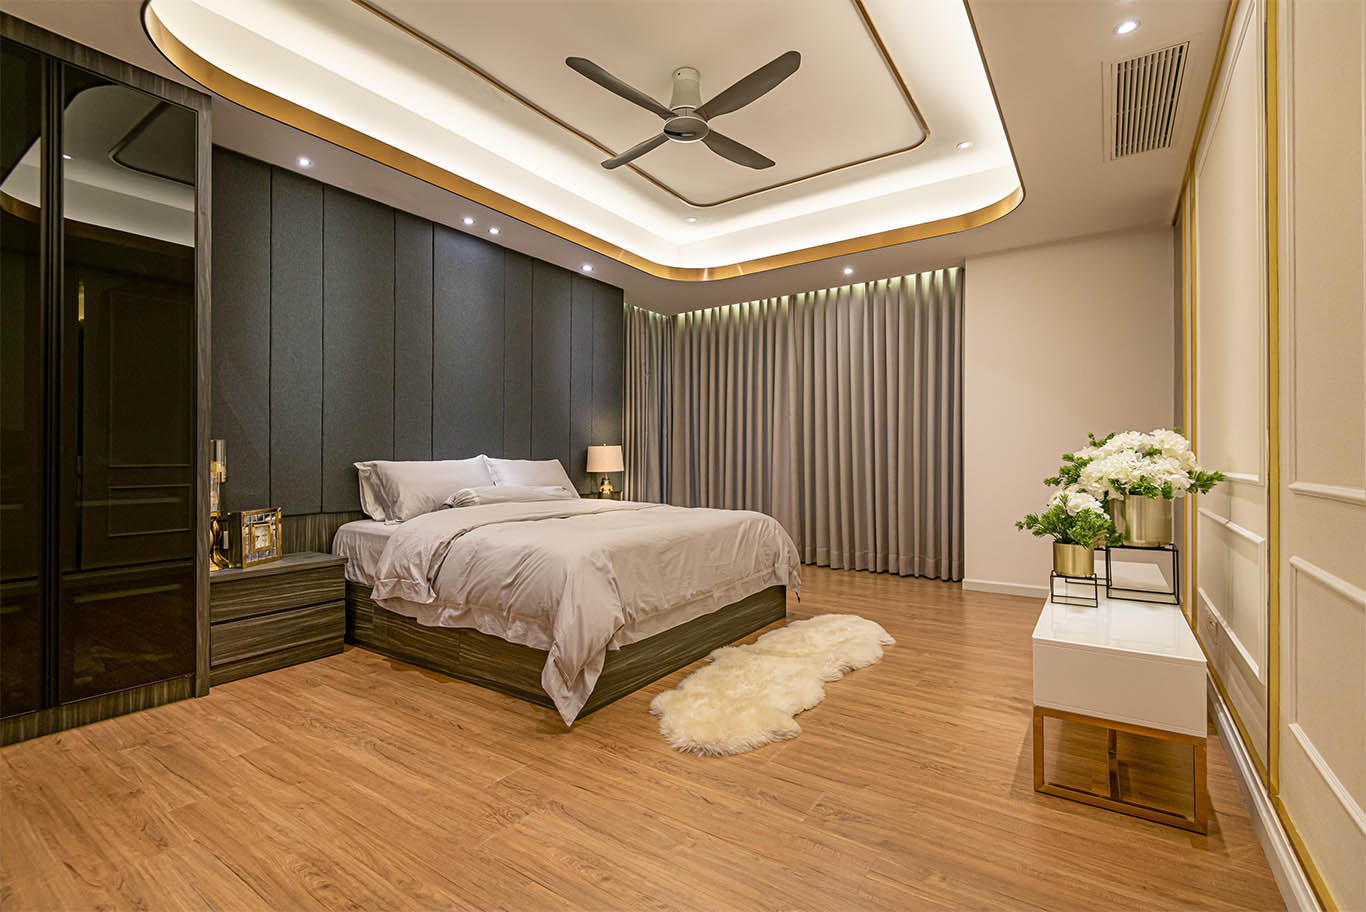 Modern luxurious bedroom with wooden floor, white wall panels, and ceiling aircon